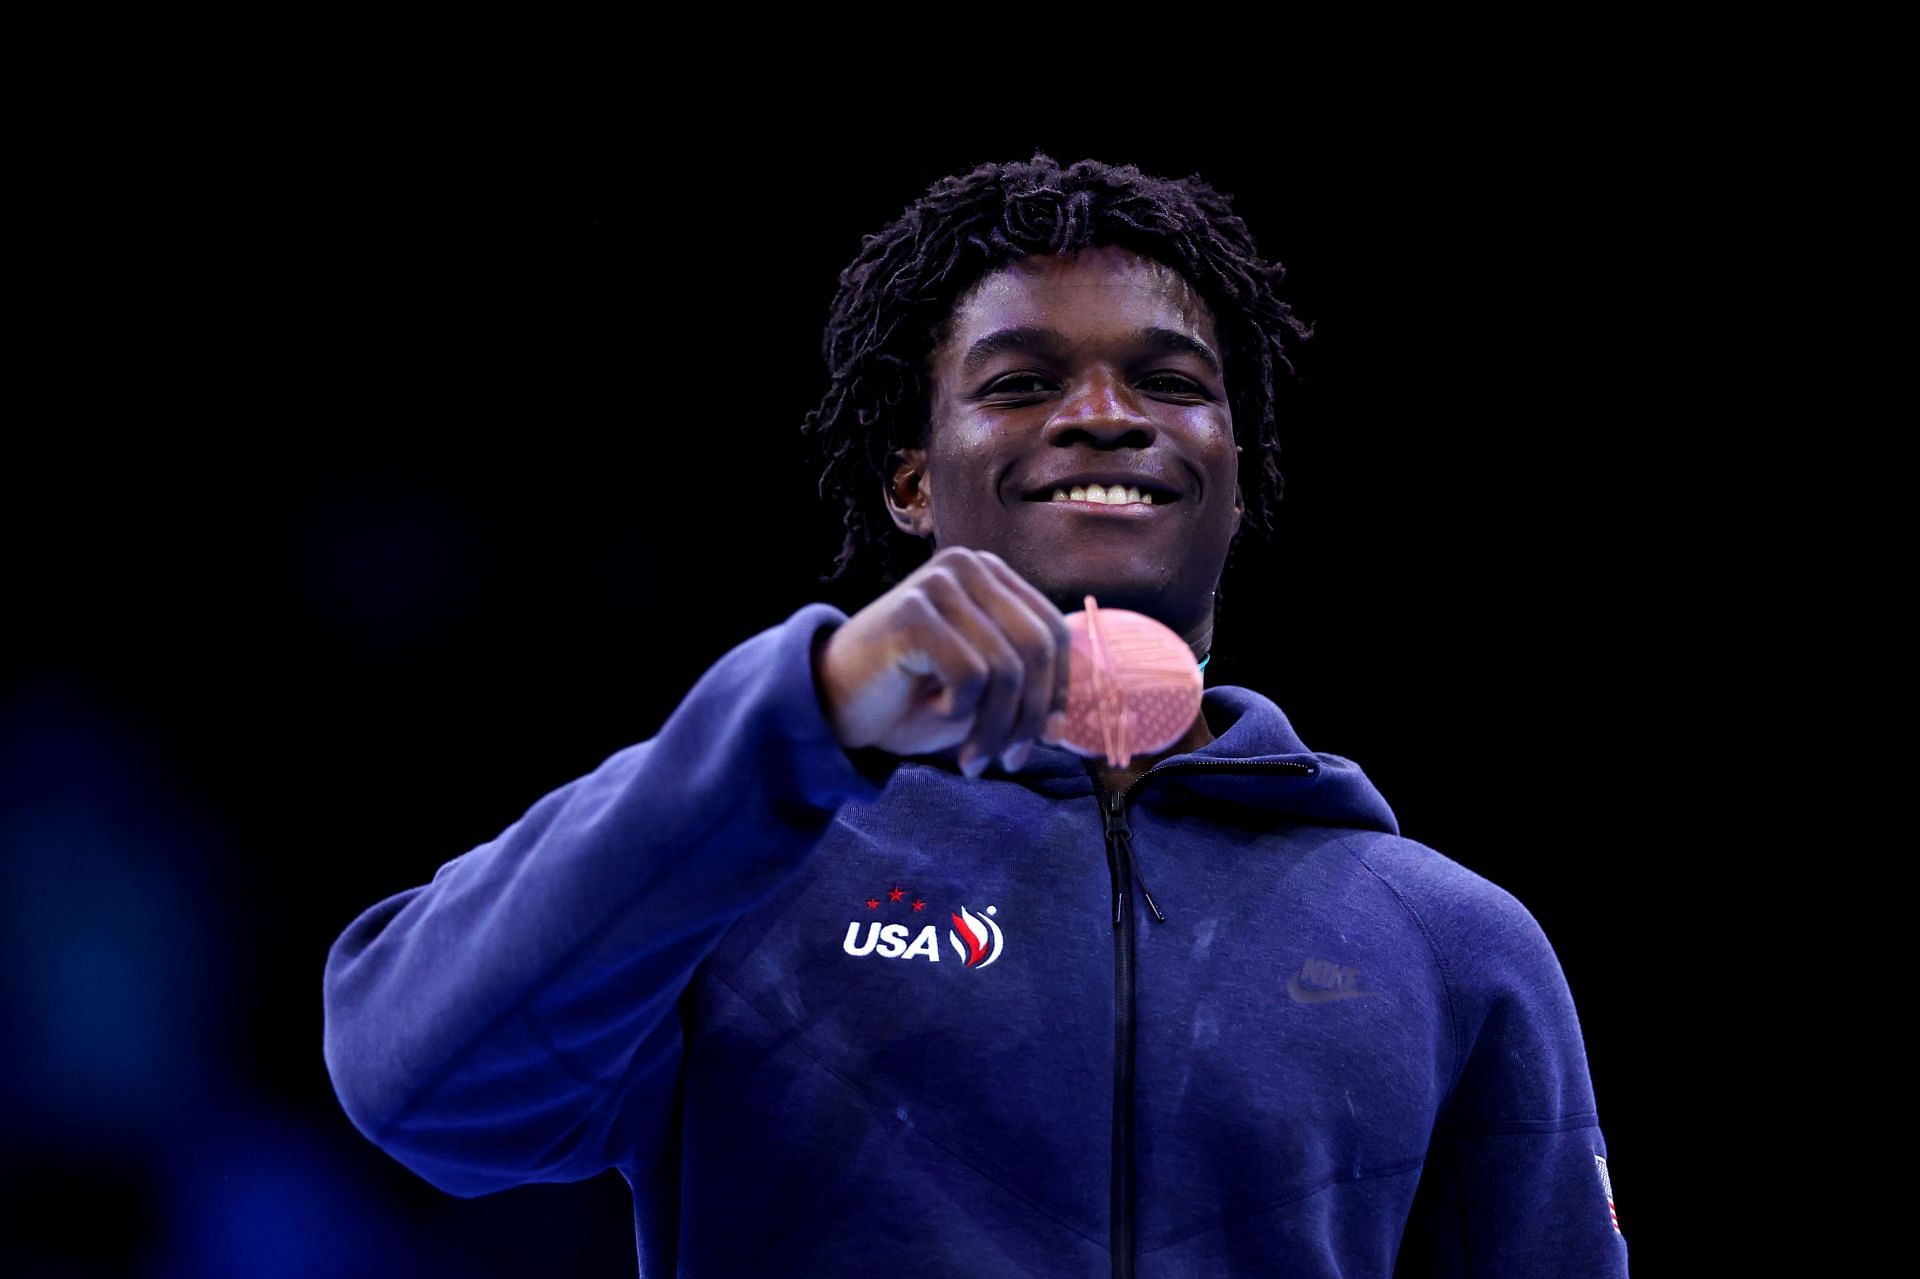 Frederick Richard during the medal ceremony for the Men&#039;s All-Around Final at the 2023 World Artistic Gymnastics Championships in Antwerp, Belgium